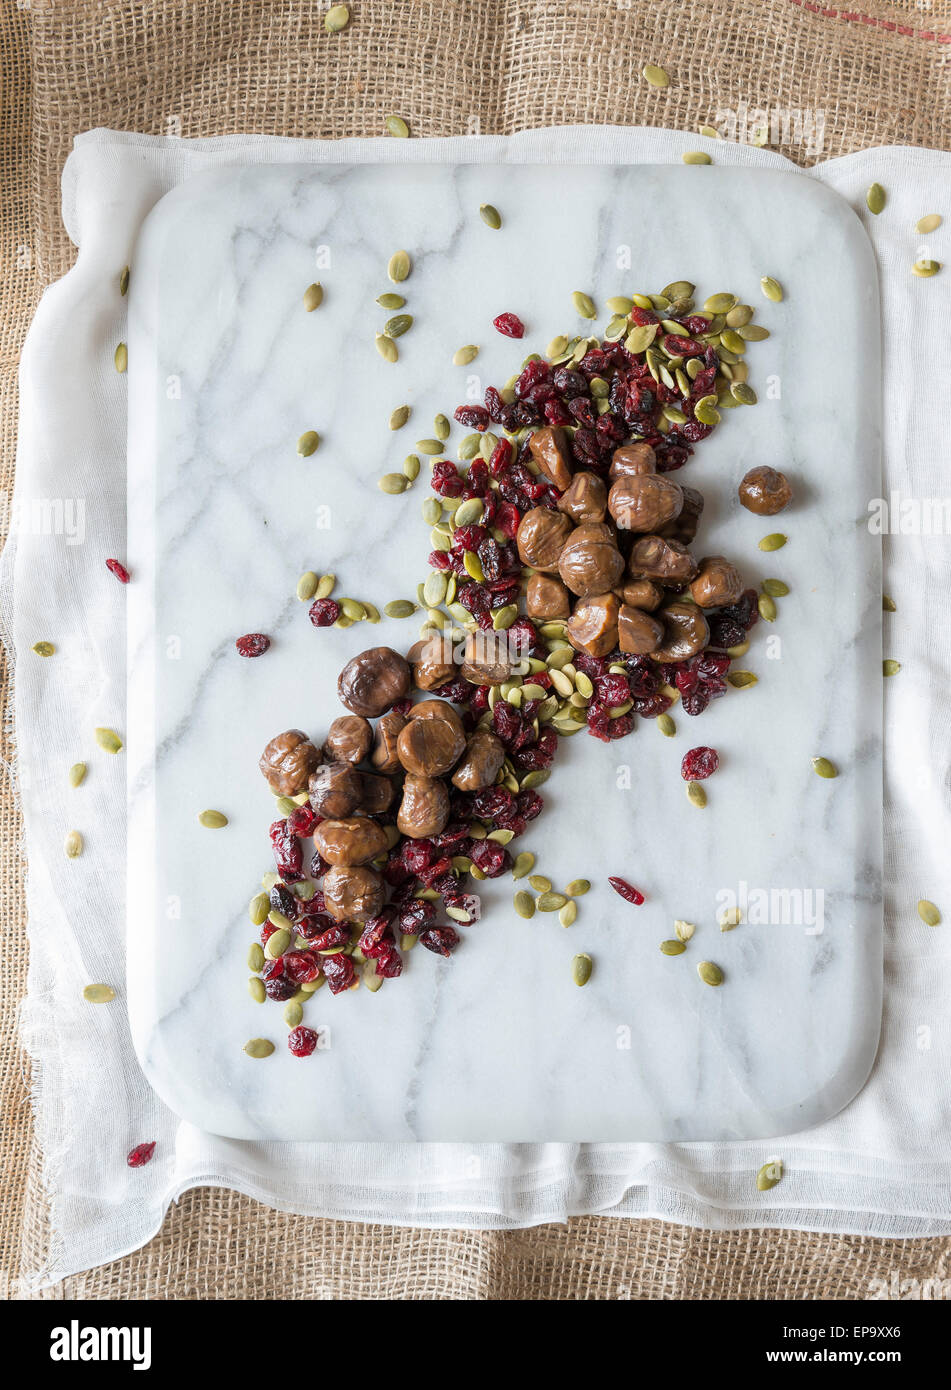 Roast chestnuts, cranberries and seeds on a marble chopping board. Stock Photo